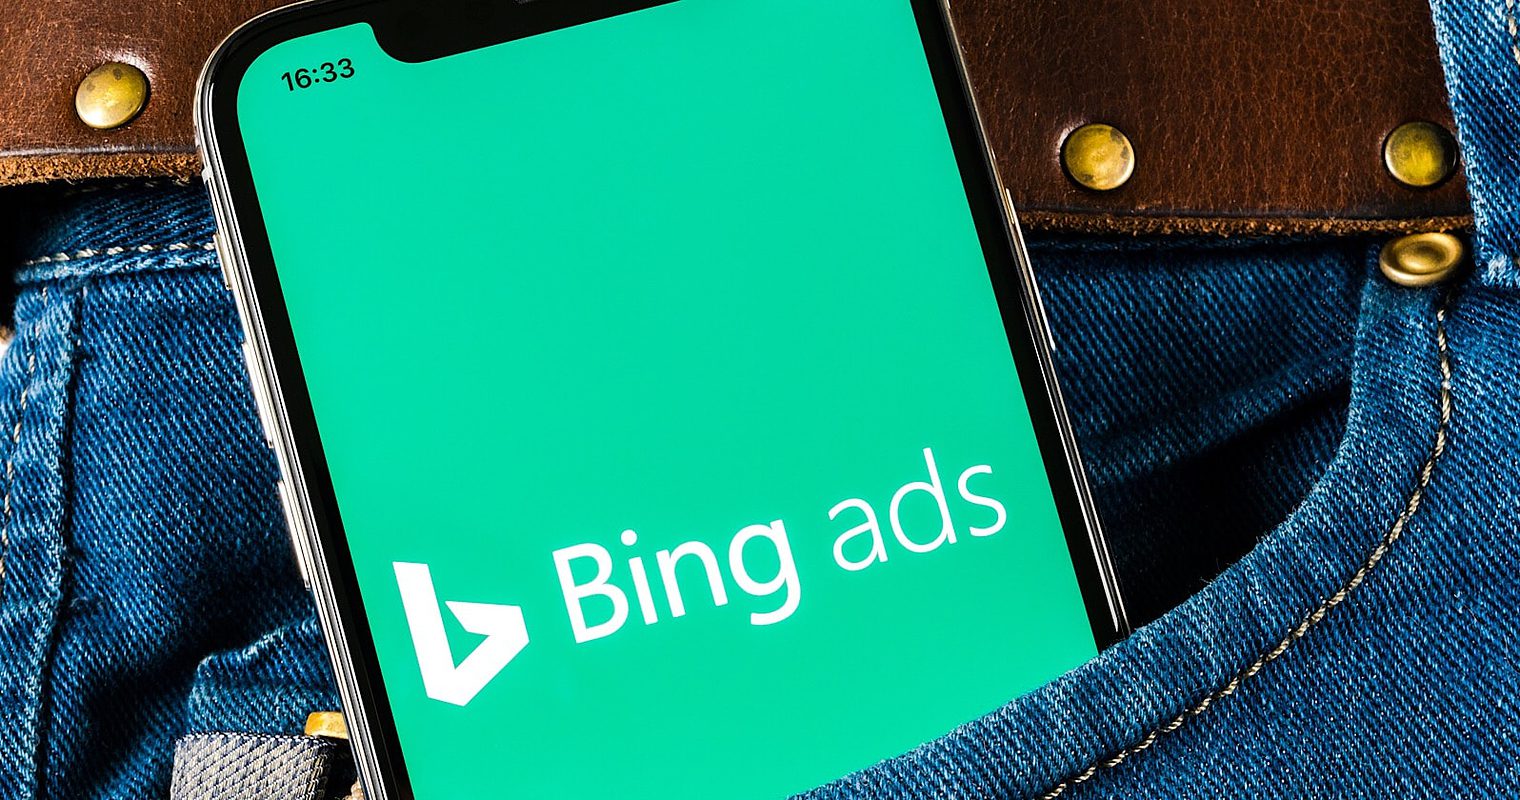 Bing Ads Can Now Have Security Badge Annotations